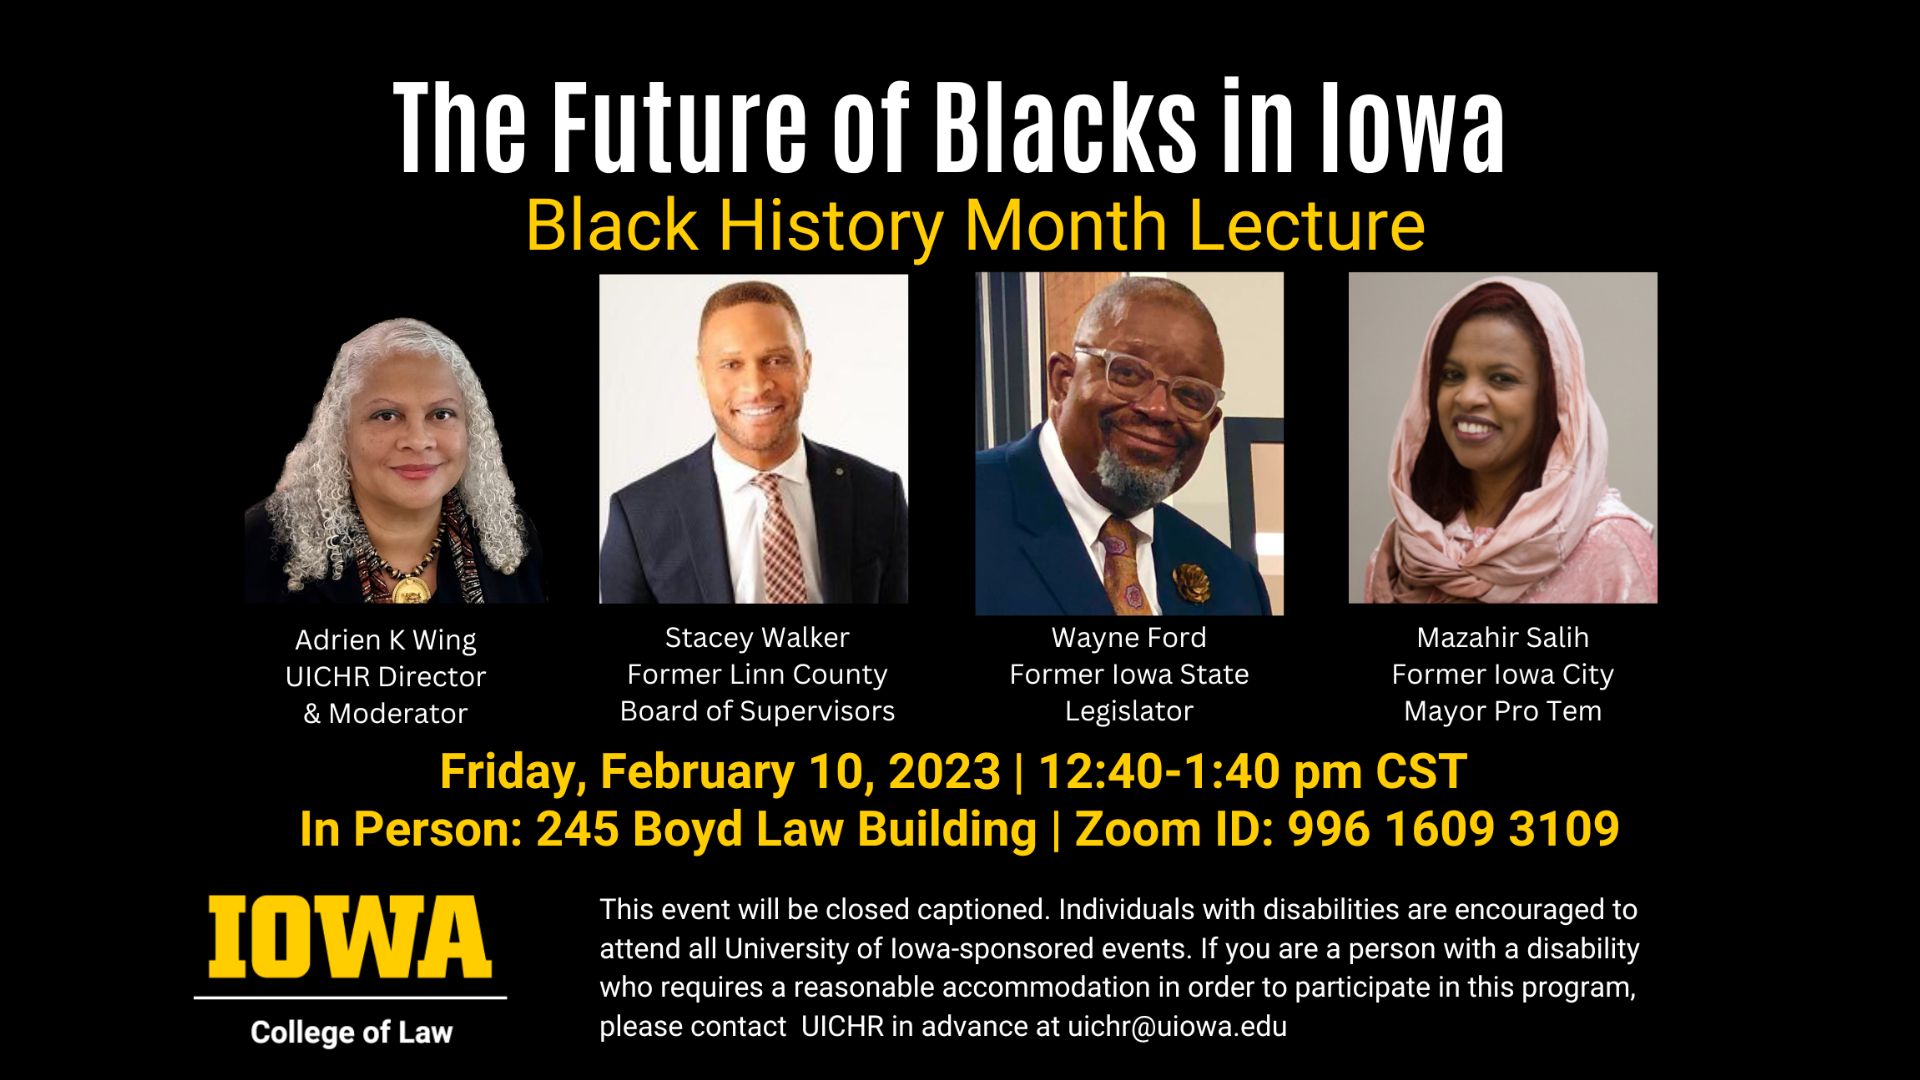 The Future of Blacks in Iowa: Black History Month Lecture. Friday, Feb 10, 2023 @ 12:40 PM to 1:40 PM CST. In Person: 245 Boyd Law Building. Zoom ID: 99616093109